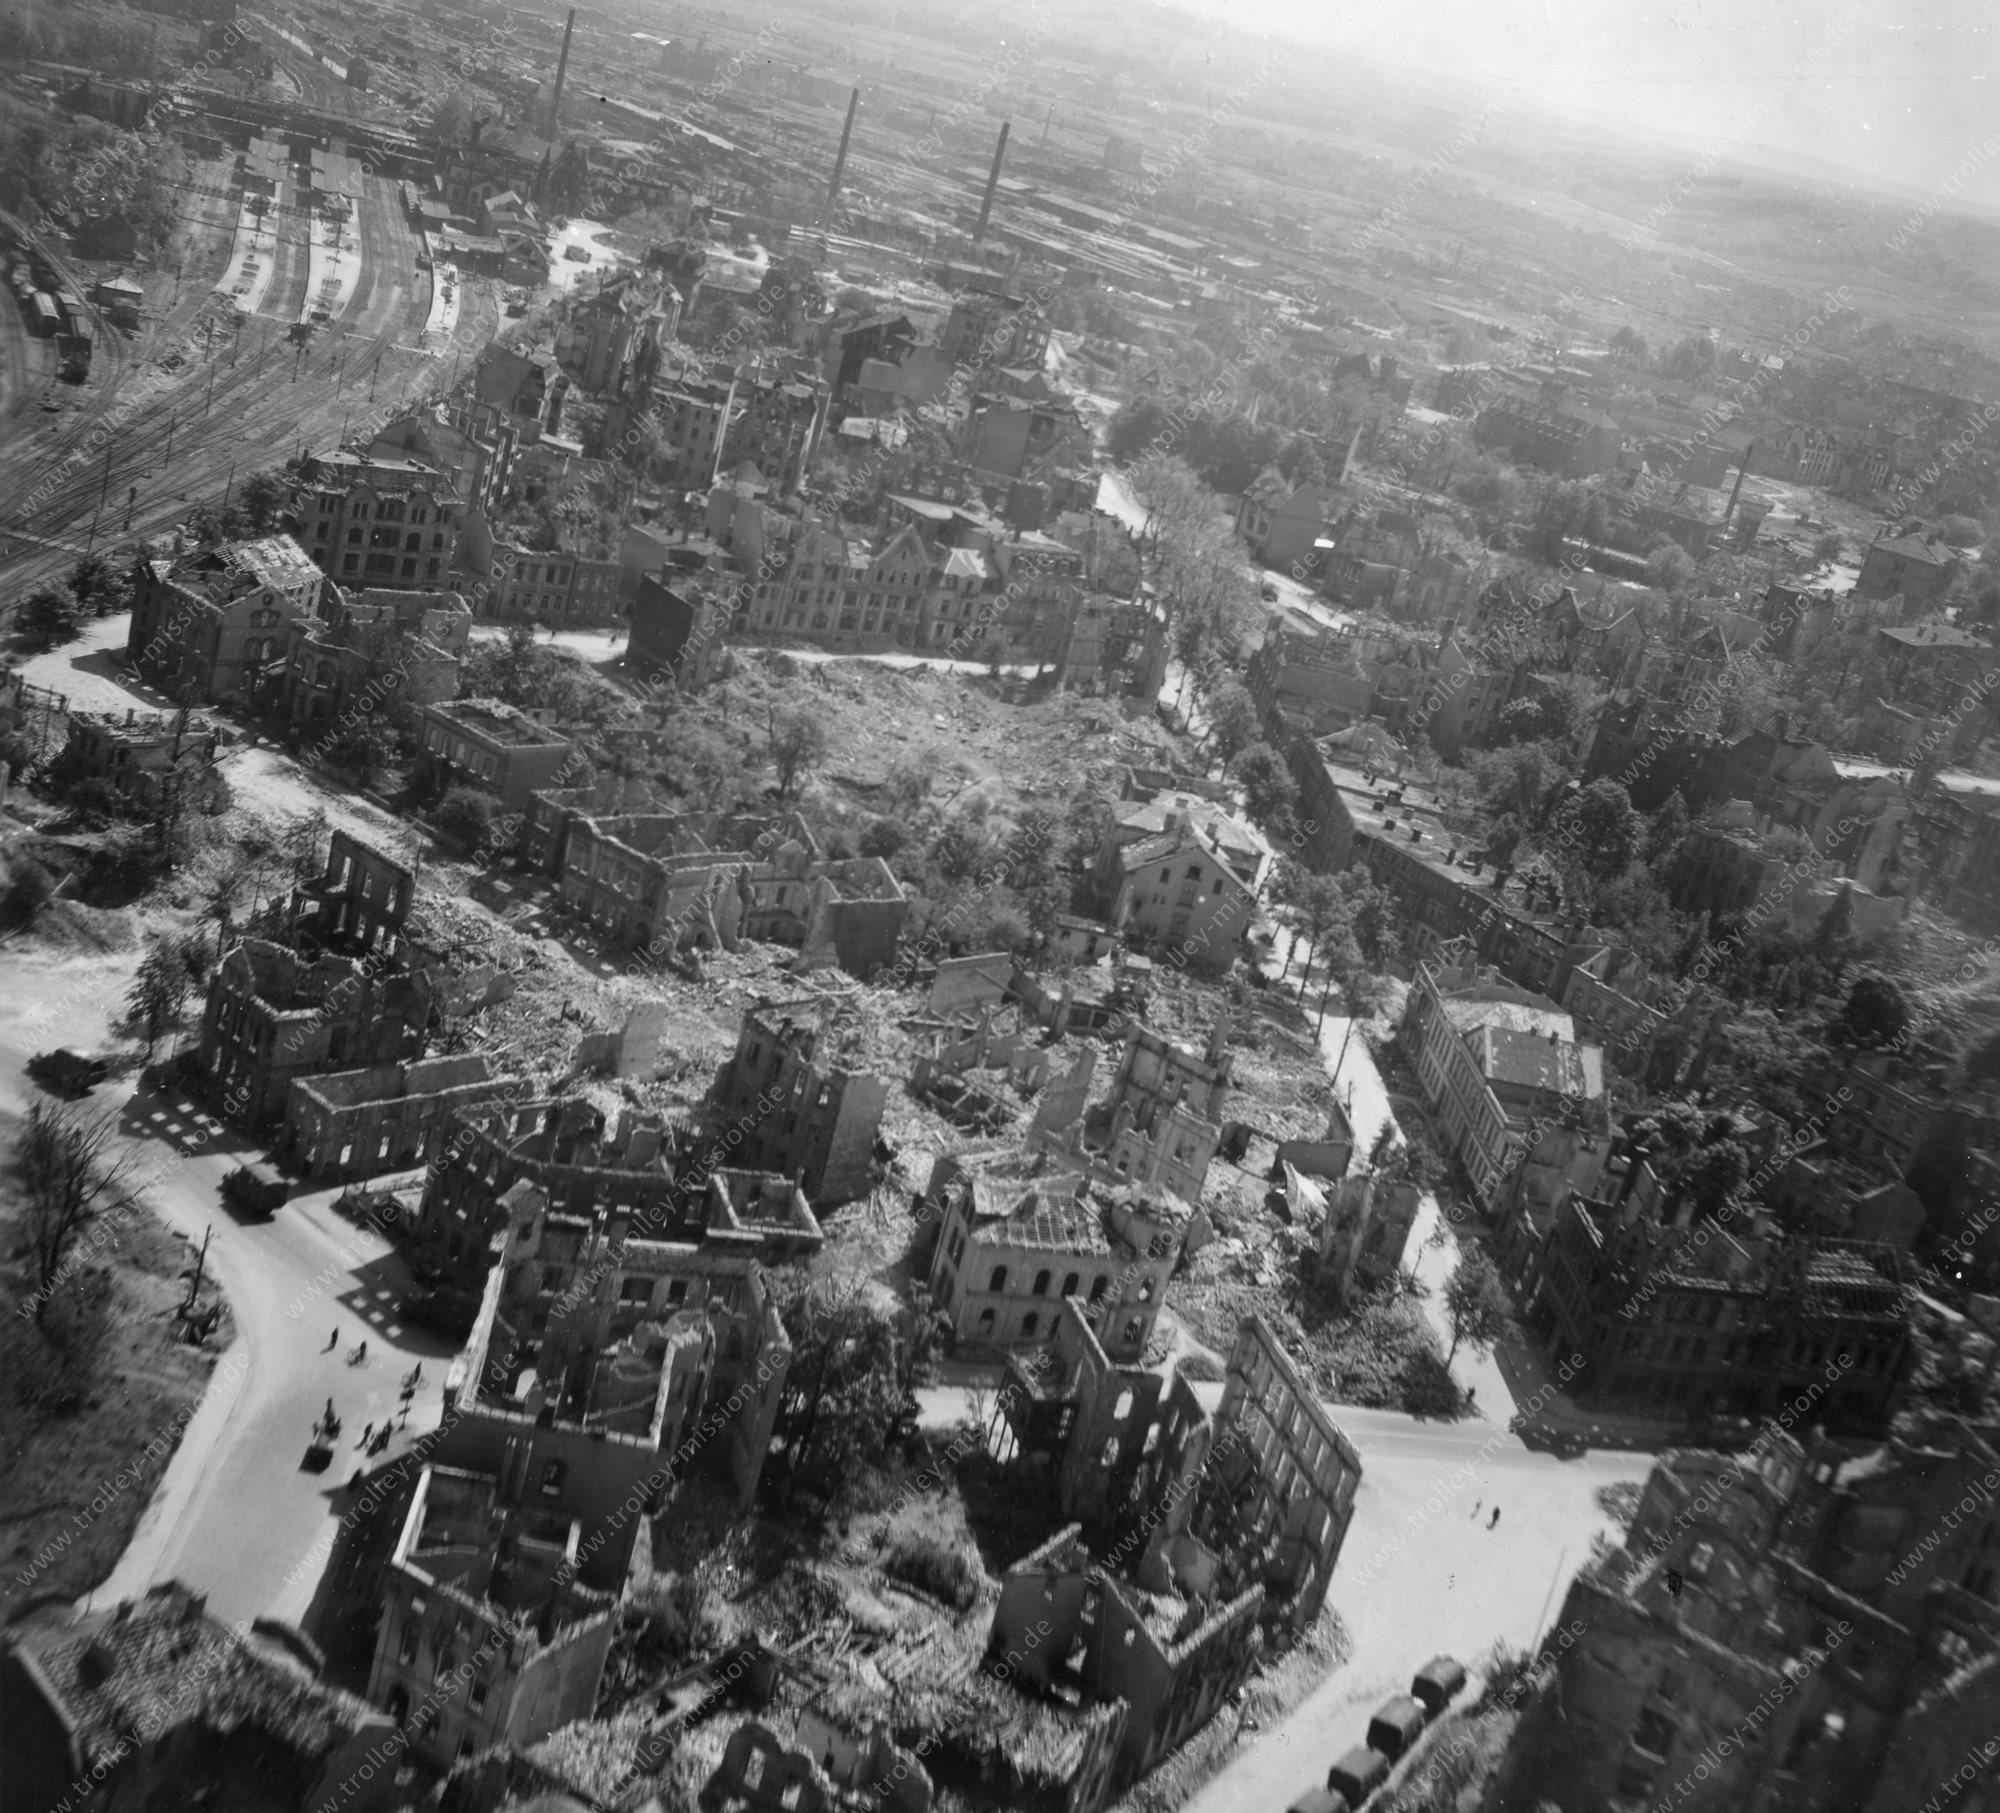 Osnabrueck from above: Aerial view after Allied air raids in World War II